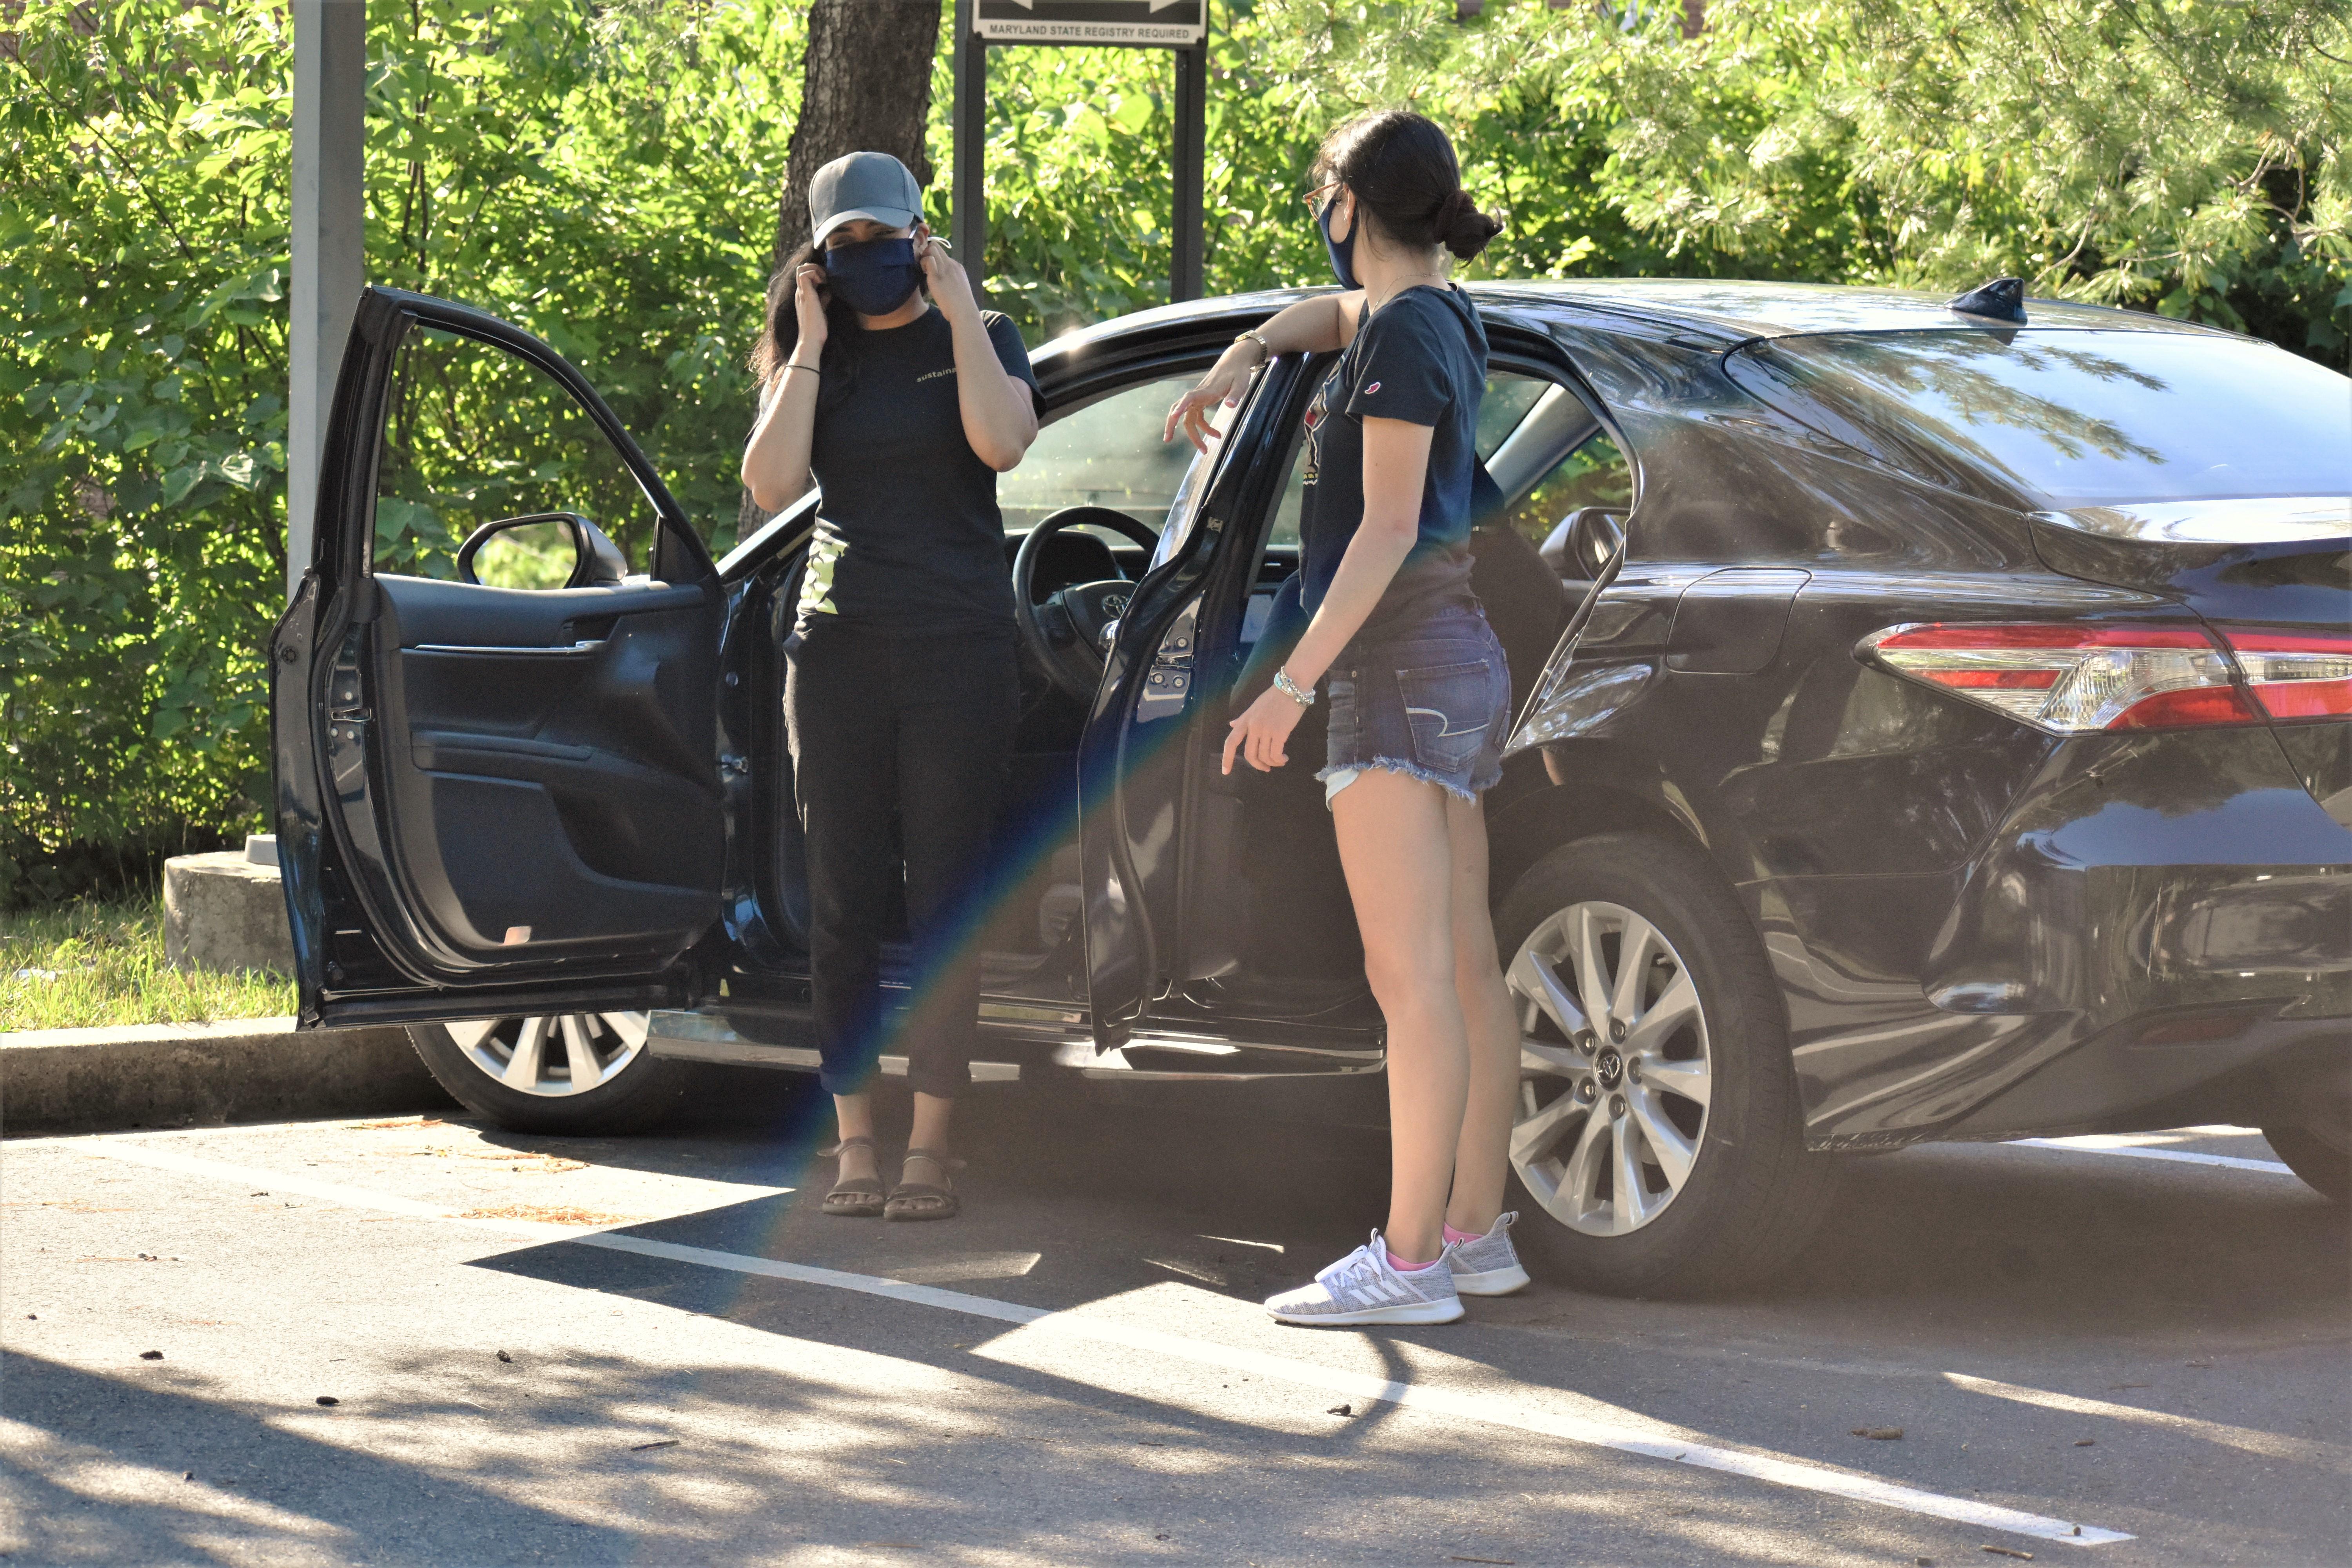 Two people standing next to a car on campus